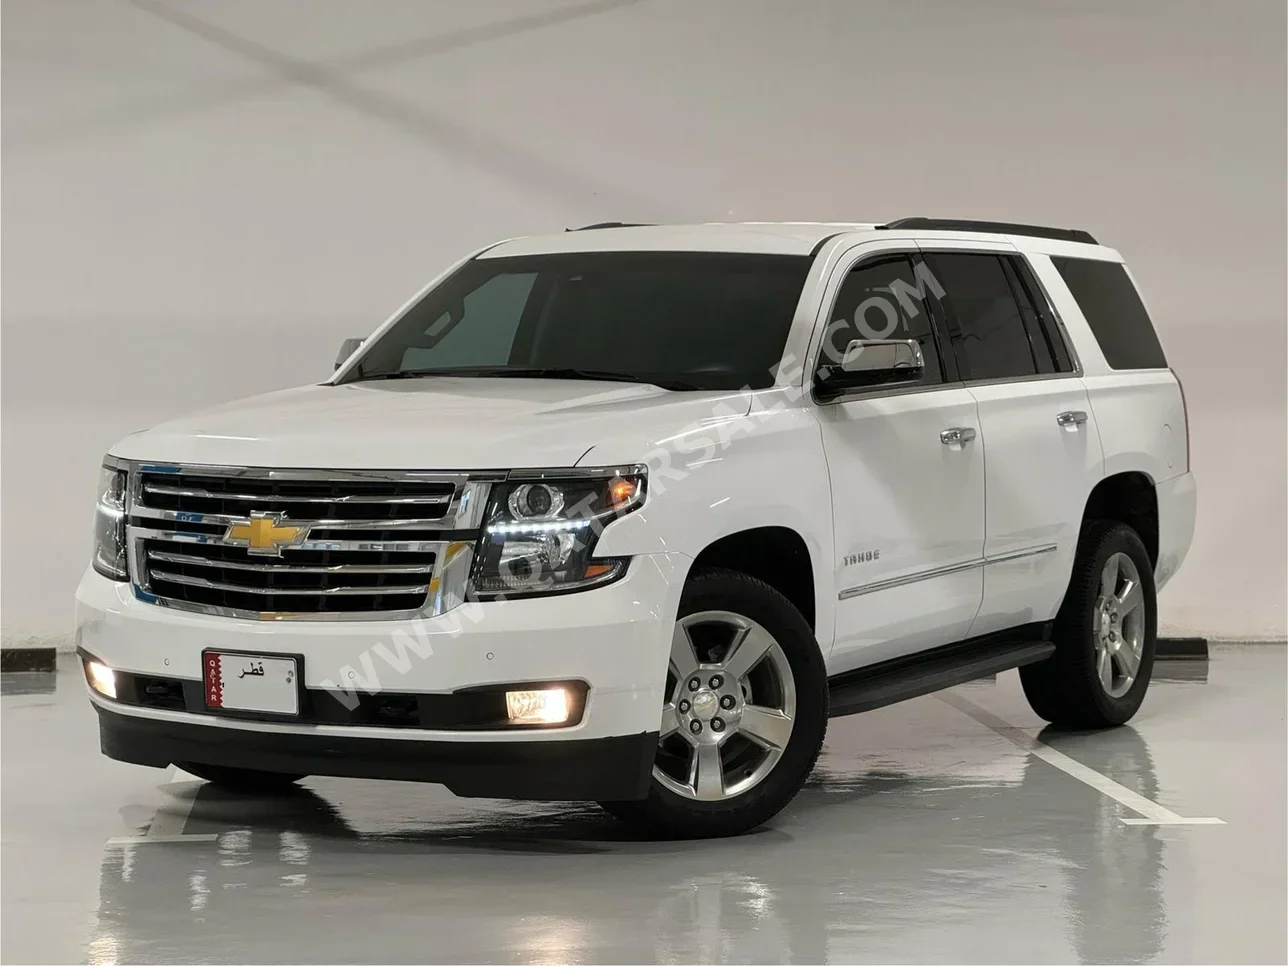 Chevrolet  Tahoe  2019  Automatic  58,000 Km  8 Cylinder  Rear Wheel Drive (RWD)  SUV  White